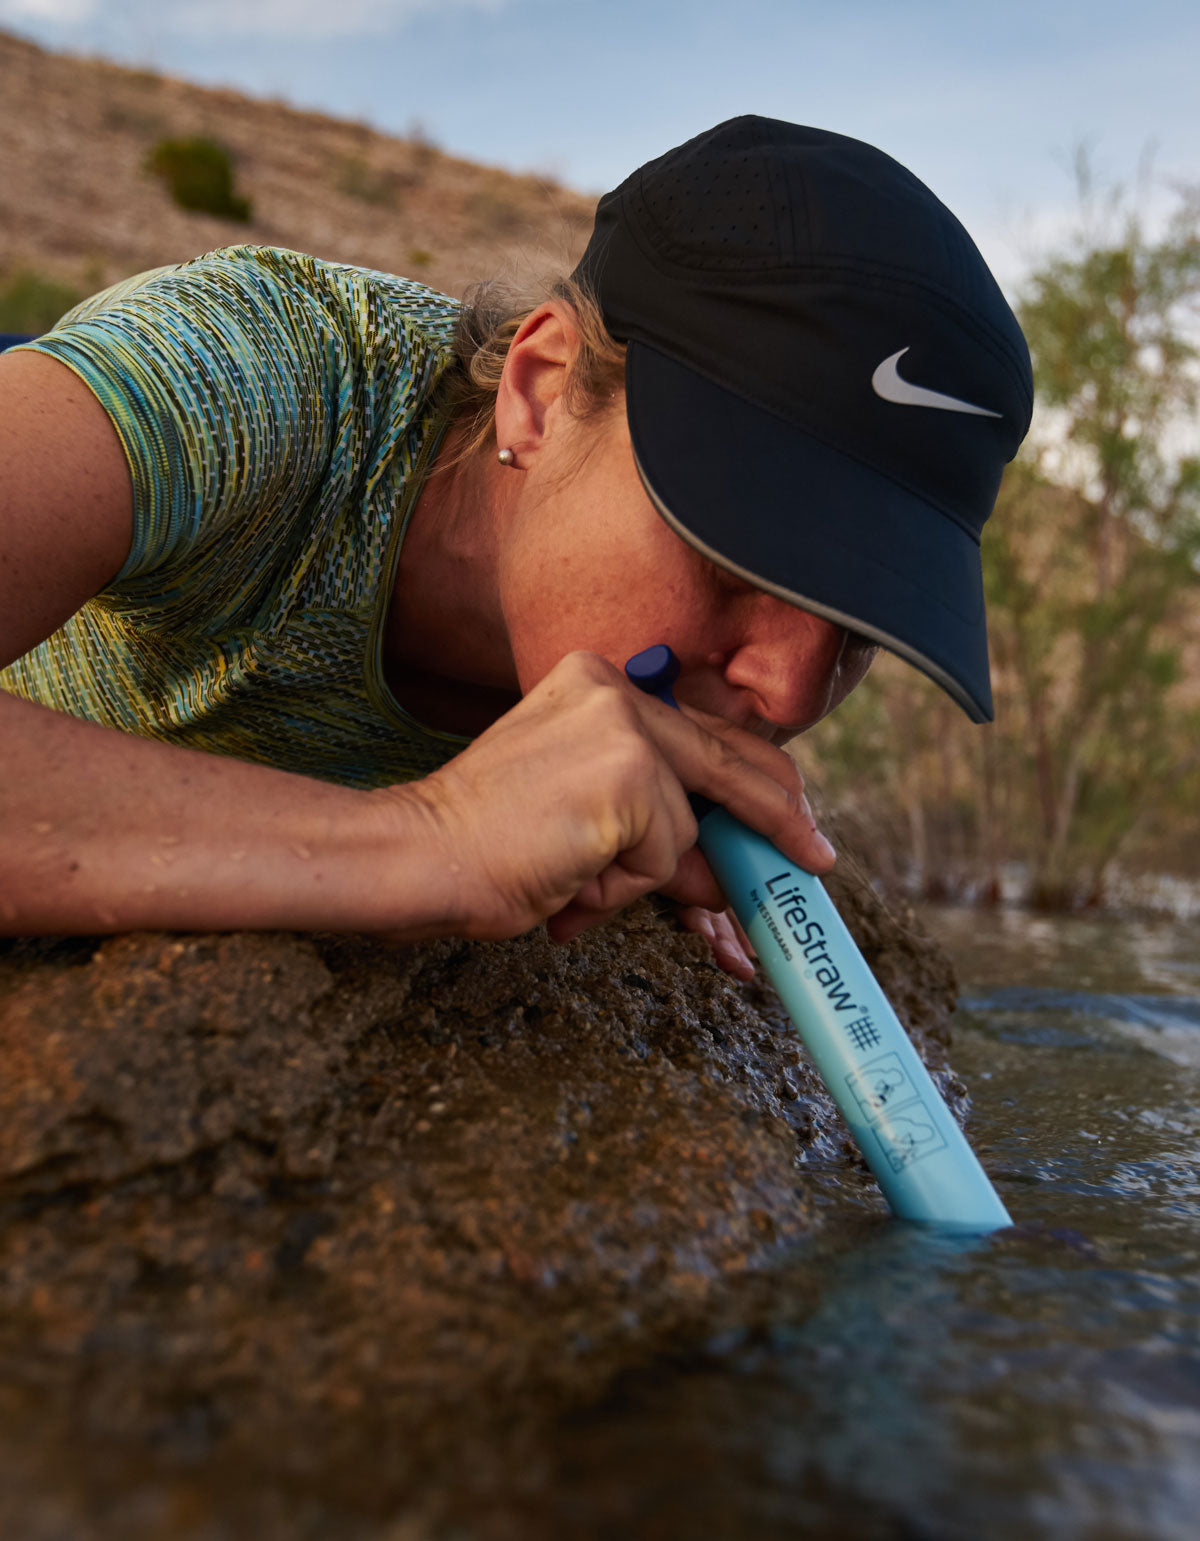 LifeStraw Max High Flow Water Purifier for Survival, Humanitarian Aid, and  Remote Job Sites – LifeStraw Water Filters & Purifiers